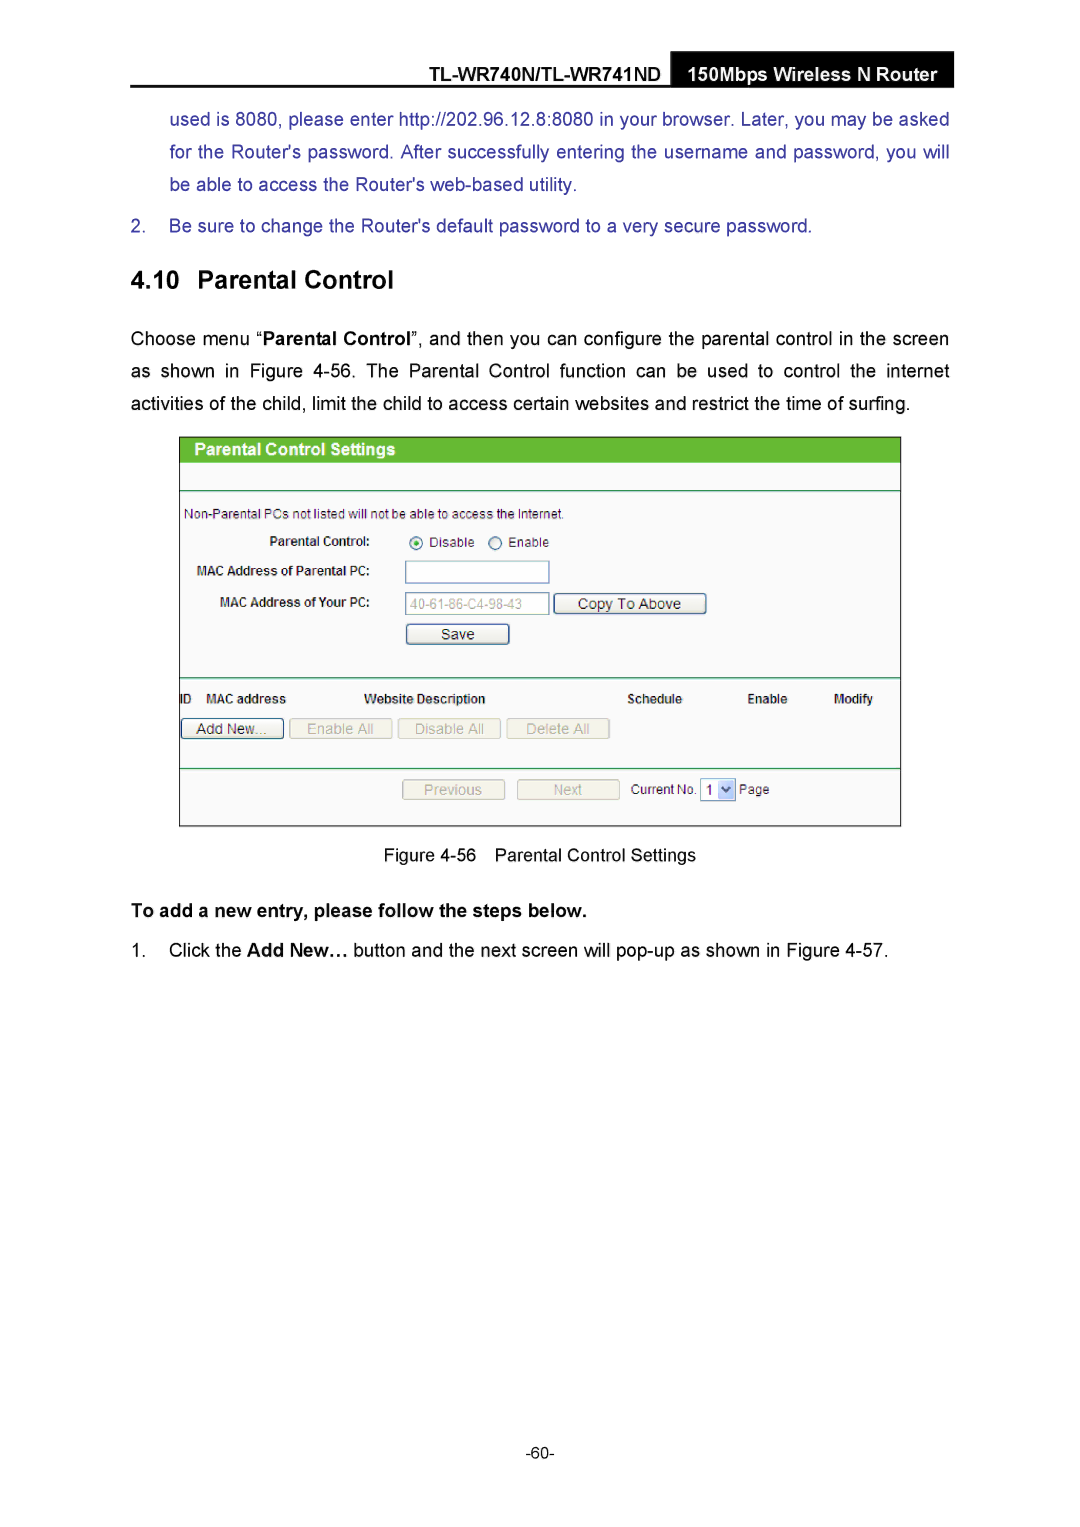 TP-Link TL-WR741ND manual Parental Control, To add a new entry, please follow the steps below 